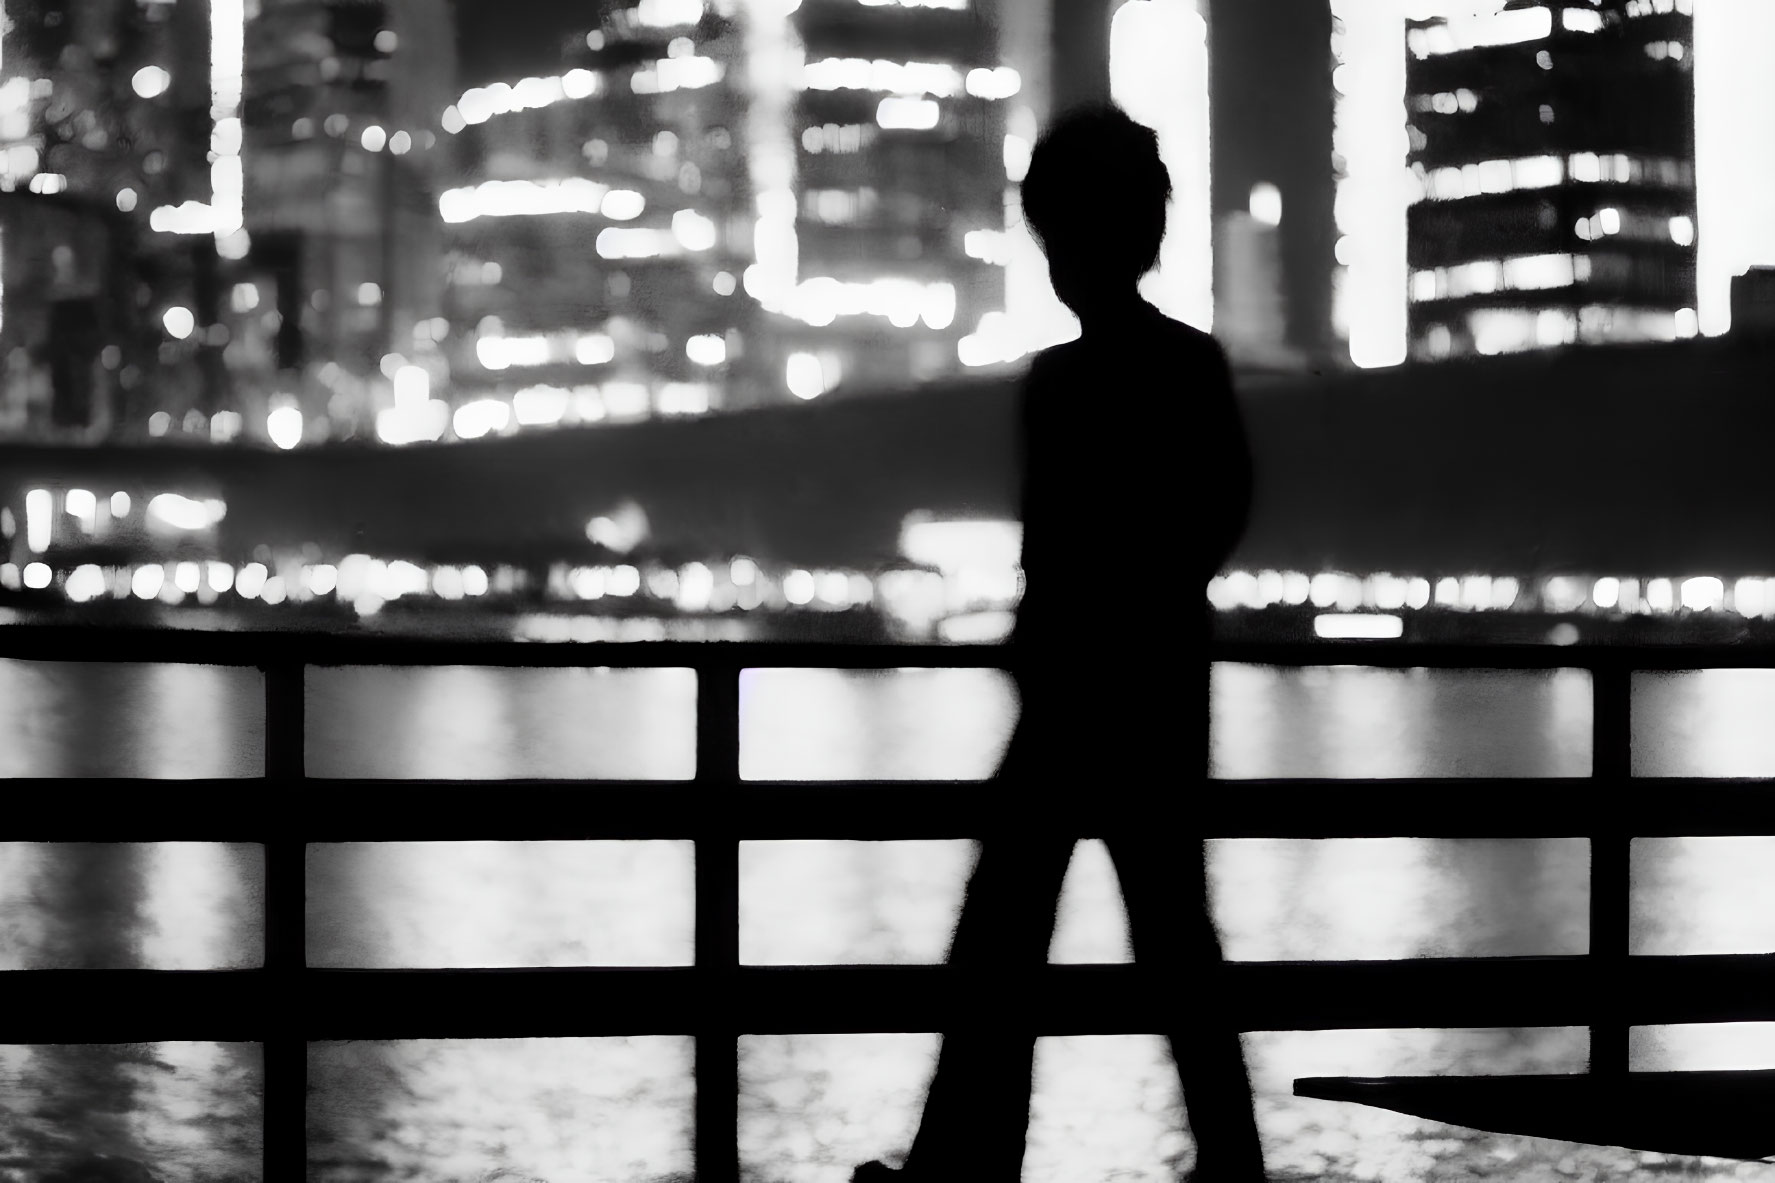 Cityscape silhouette at night with person, water reflections.